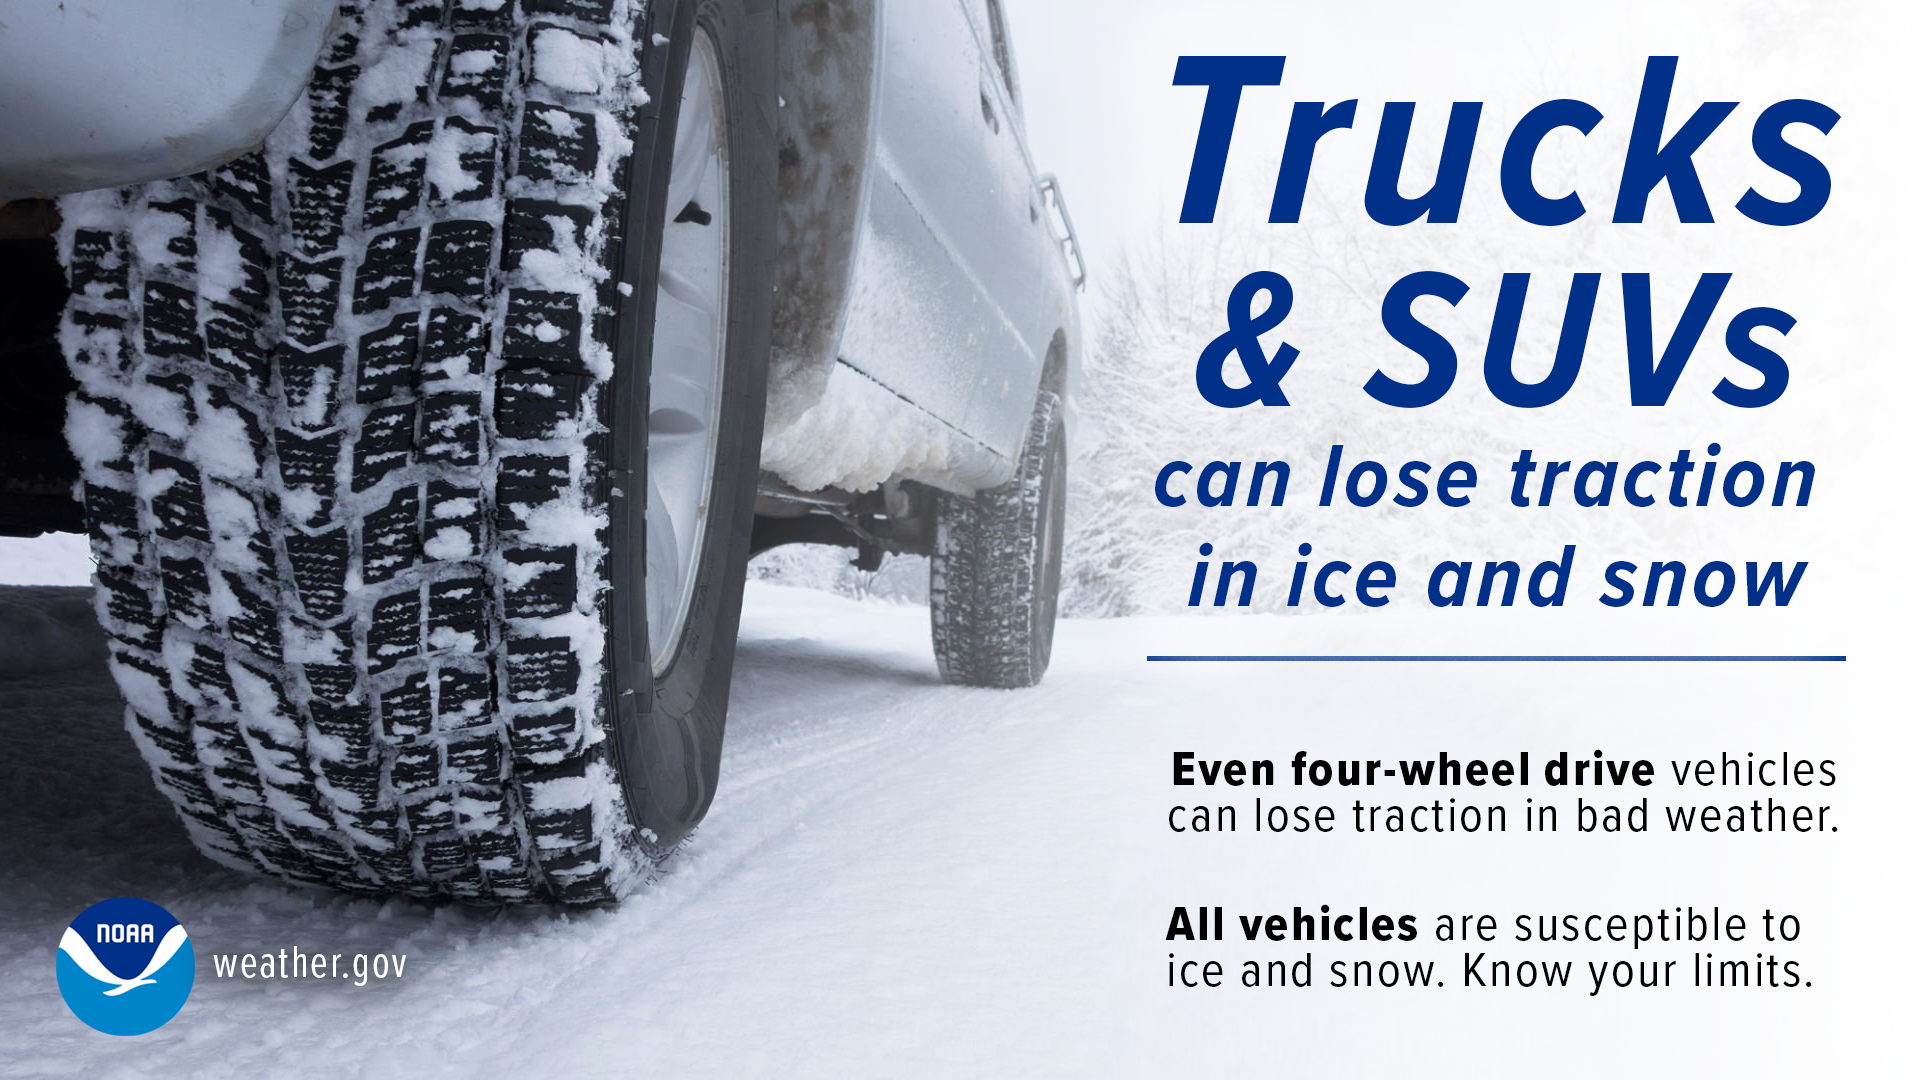 Pictured: A truck tire with snow between the treads. Text: Trucks & SUVs can lose traction in ice and snow. Even four-wheel drive vehicles can lose traction in bad weather. All vehicles are susceptible to ice and snow. Know your limits.